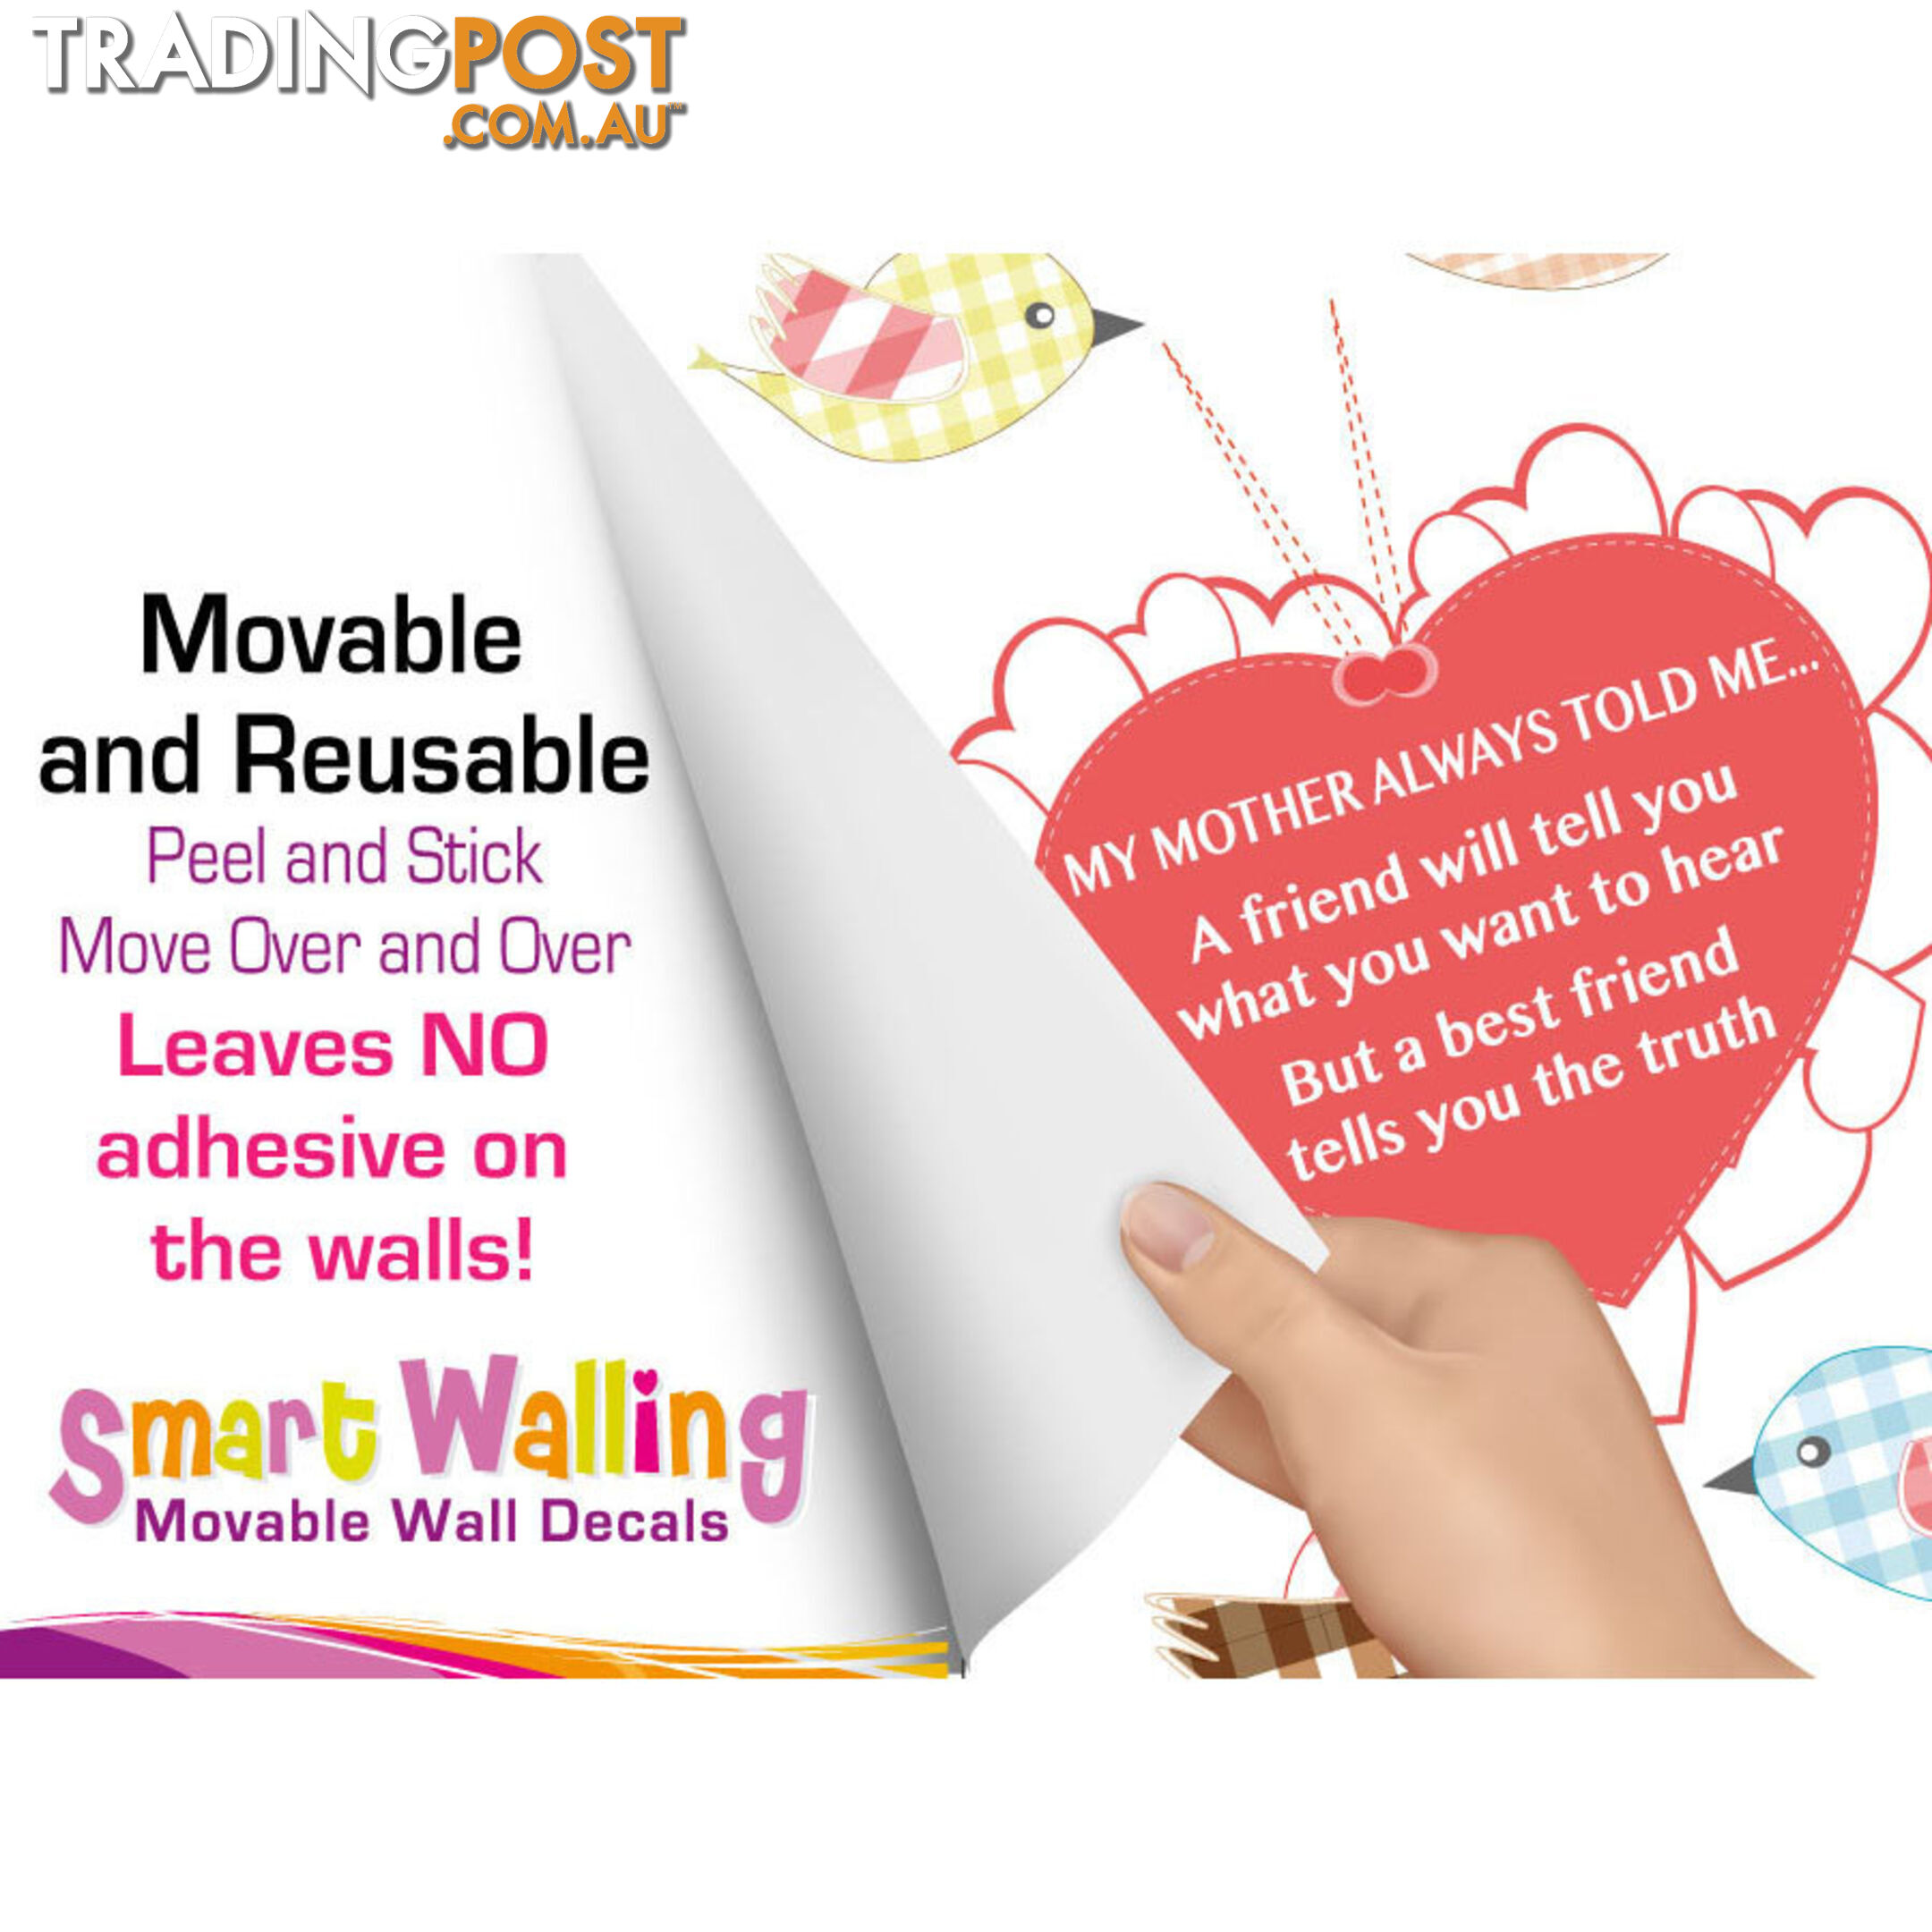 Medium Size My Mother Told Me Wall Sticker Quotes - Totally Movable